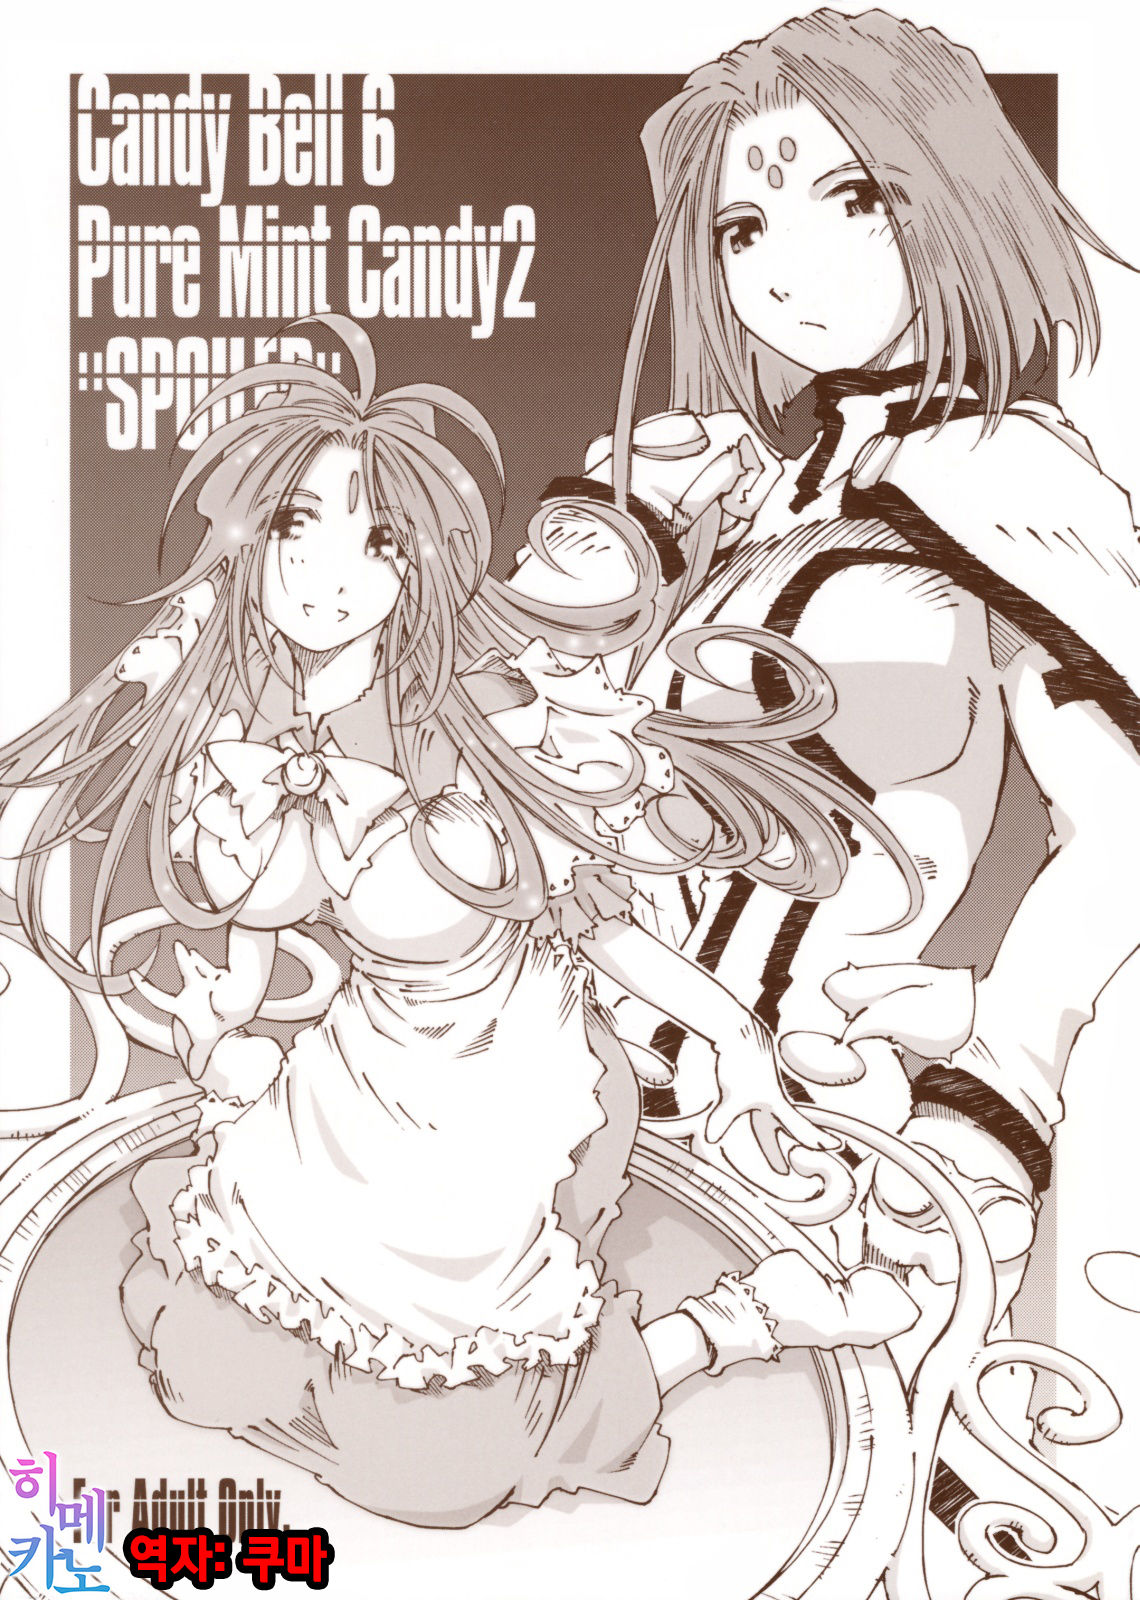 (C74) [RPG COMPANY 2 (Toumi Haruka)] Candy Bell 6 - Pure Mint Candy 2 "SPOILED" (Ah! My Goddess) [Korean] (C74) [RPG カンパニー2 (遠海はるか)] Candy Bell 6 Pure Mint Candy2 "SPOILED" (ああっ女神さまっ) [韓国翻訳]